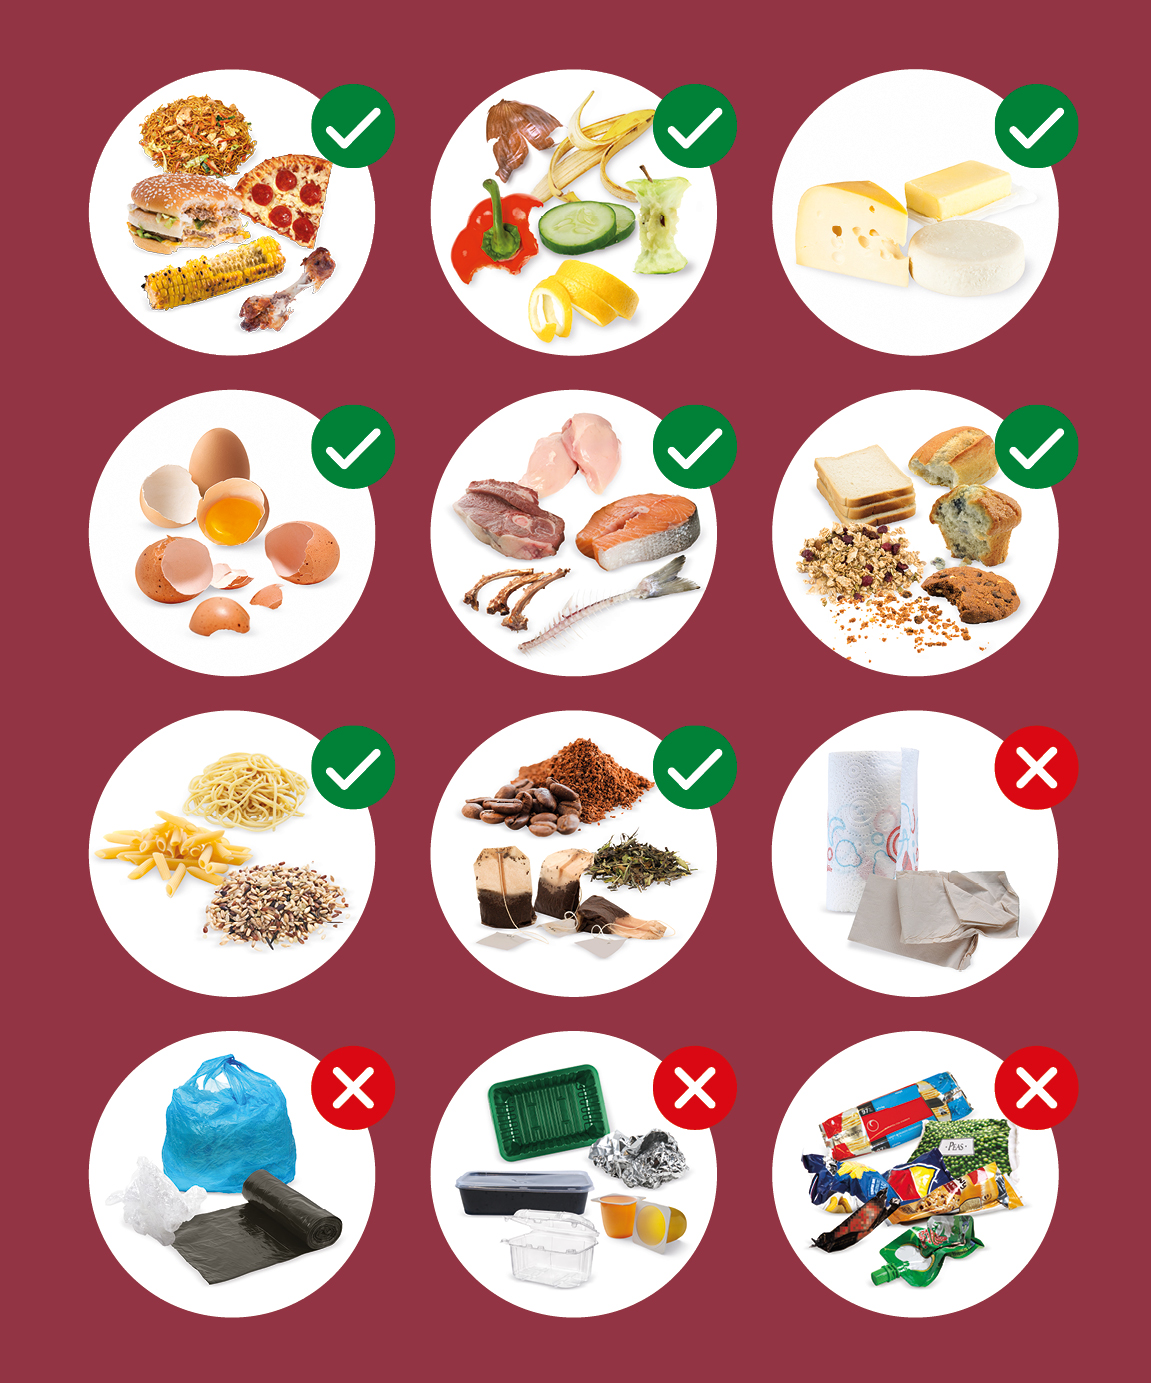  Items accepted in the food scraps bin include leftovers and spoiled food; fruit and veg peelings; dairy products; eggs and eggshells; meat, small bones, fish and seafood (no shells); bread, pastries, cakes and biscuits; rice, grains, cereals and noodles; and tea bags, tea leaves and coffee grounds. Items not accepted in the food scraps bin include food-soiled paper towels or napkins; plastic bags and plastic film; food packaging, takeaway containers, meat trays and foil; and general rubbish.